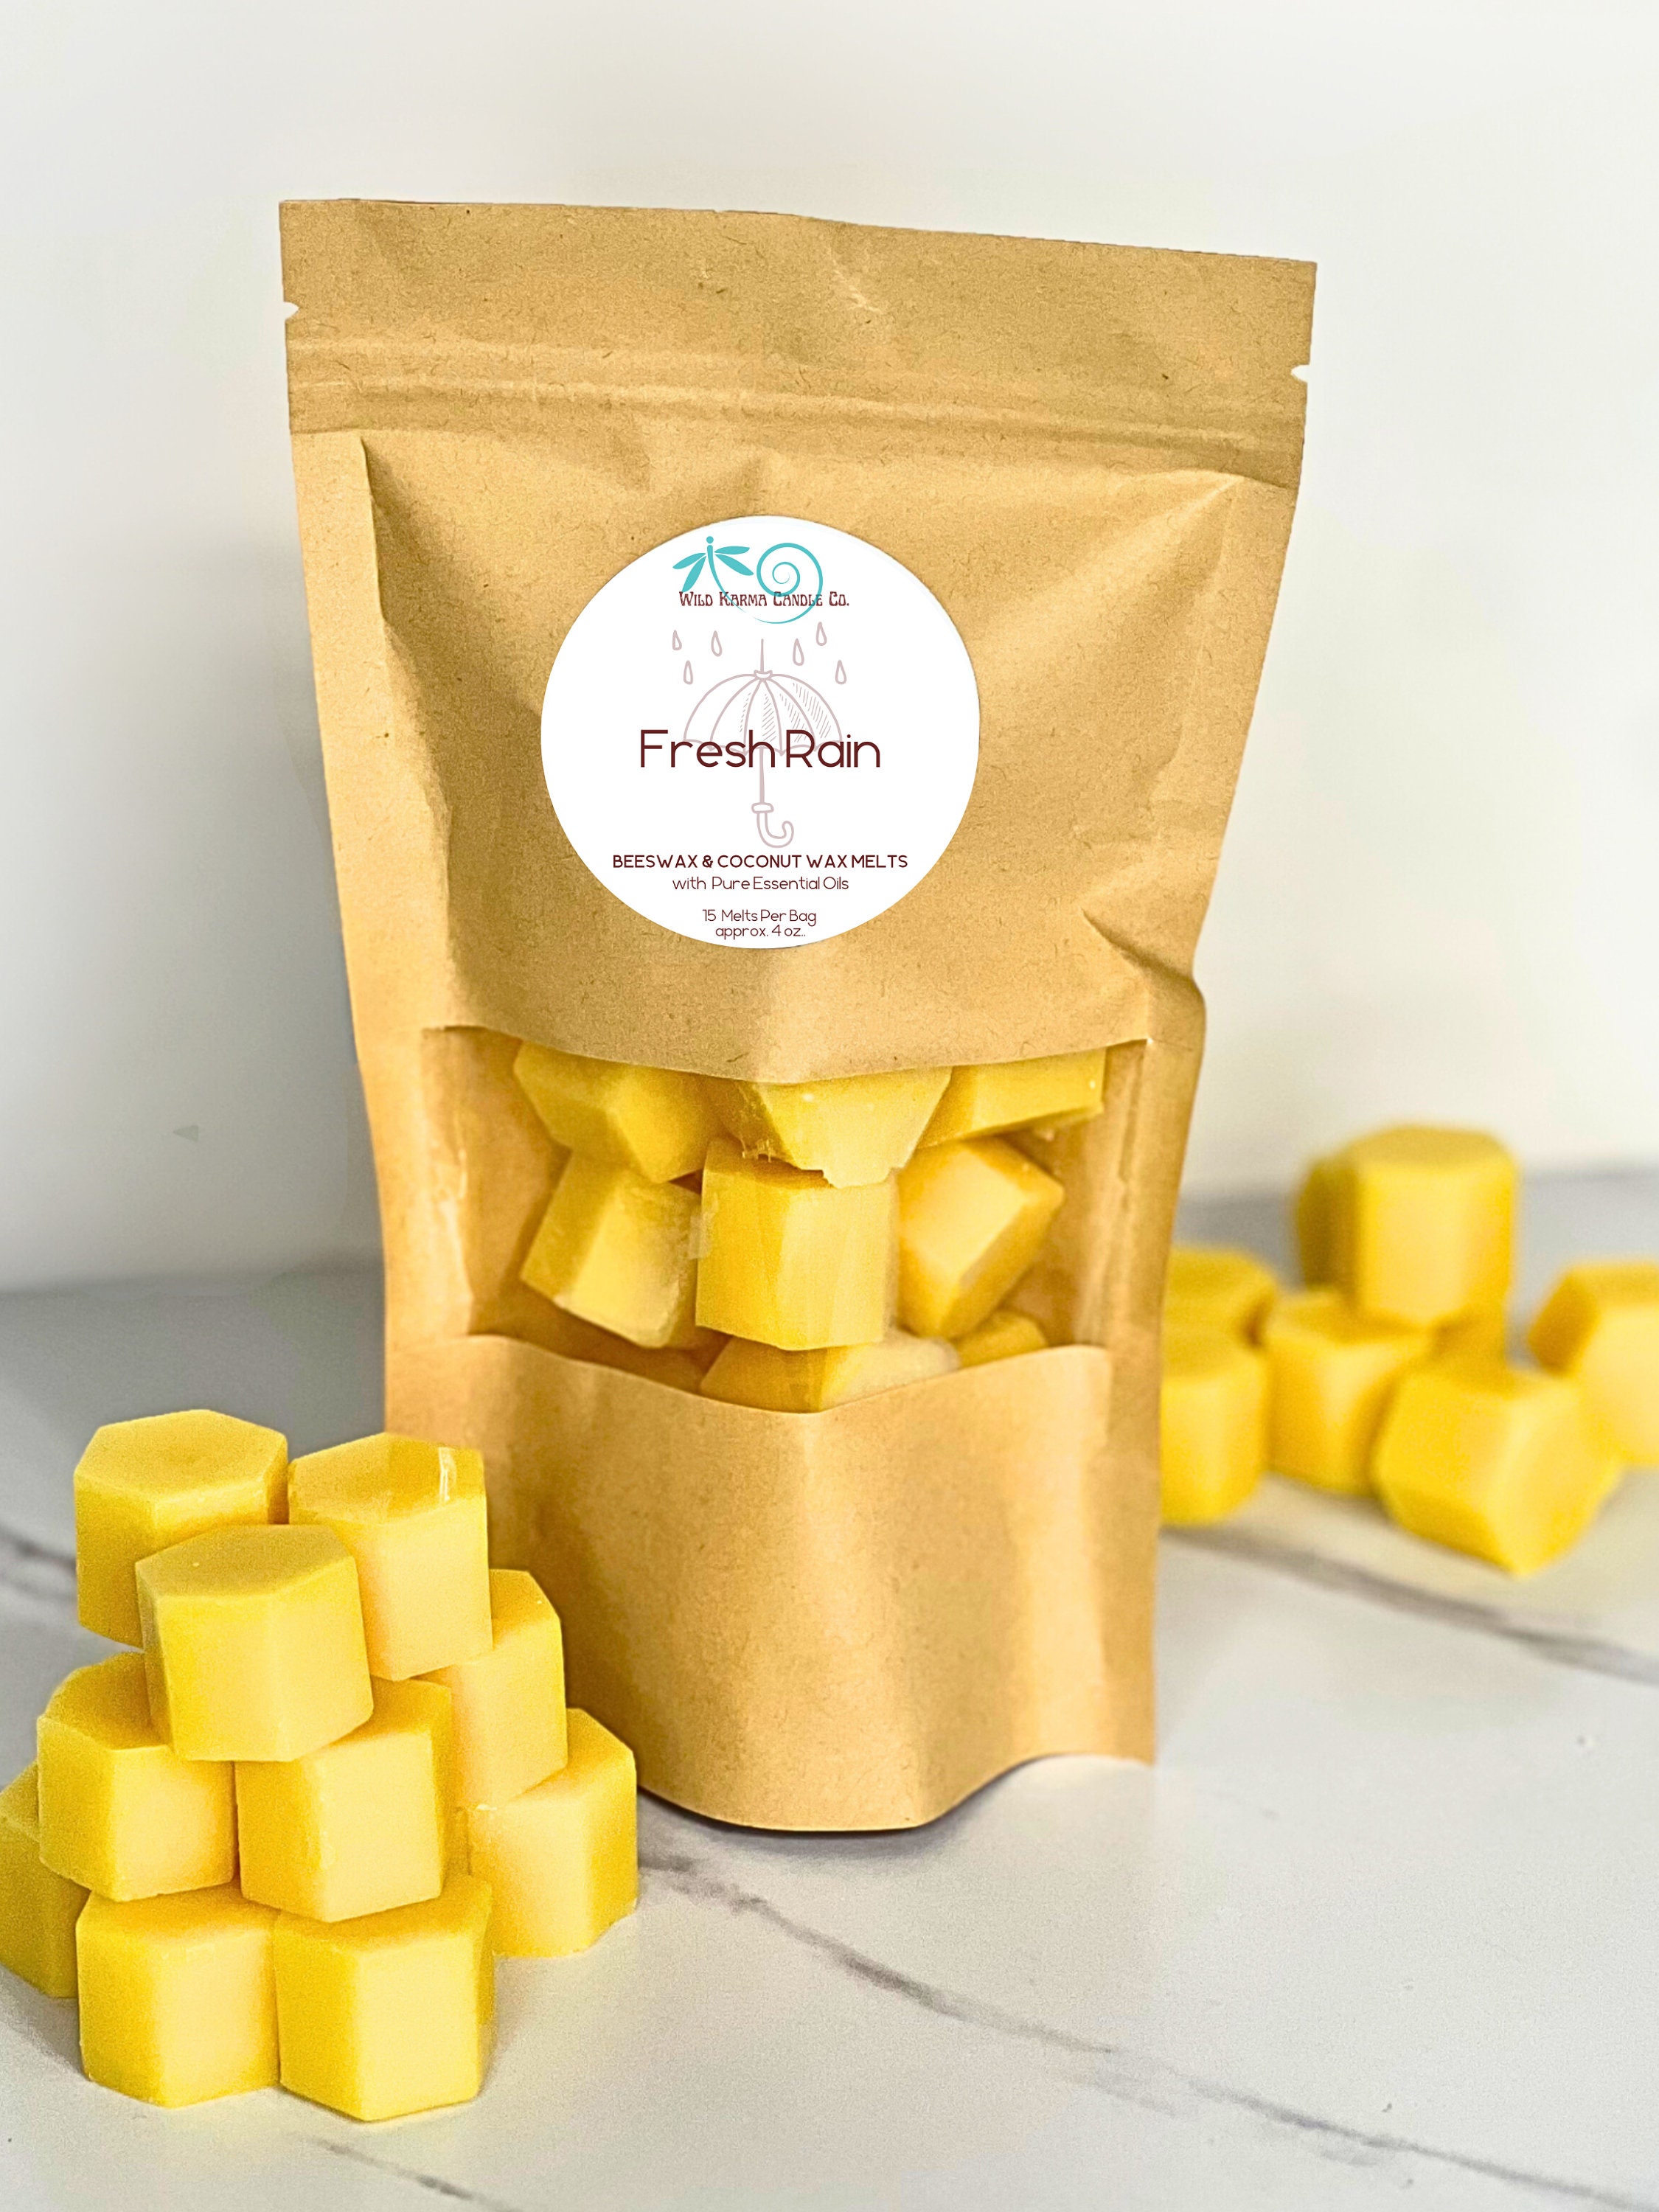 Aira Soy Wax Melt - Organic, Vegan, Kosher, Scented Soy Wax Cubes w/Essential Oi